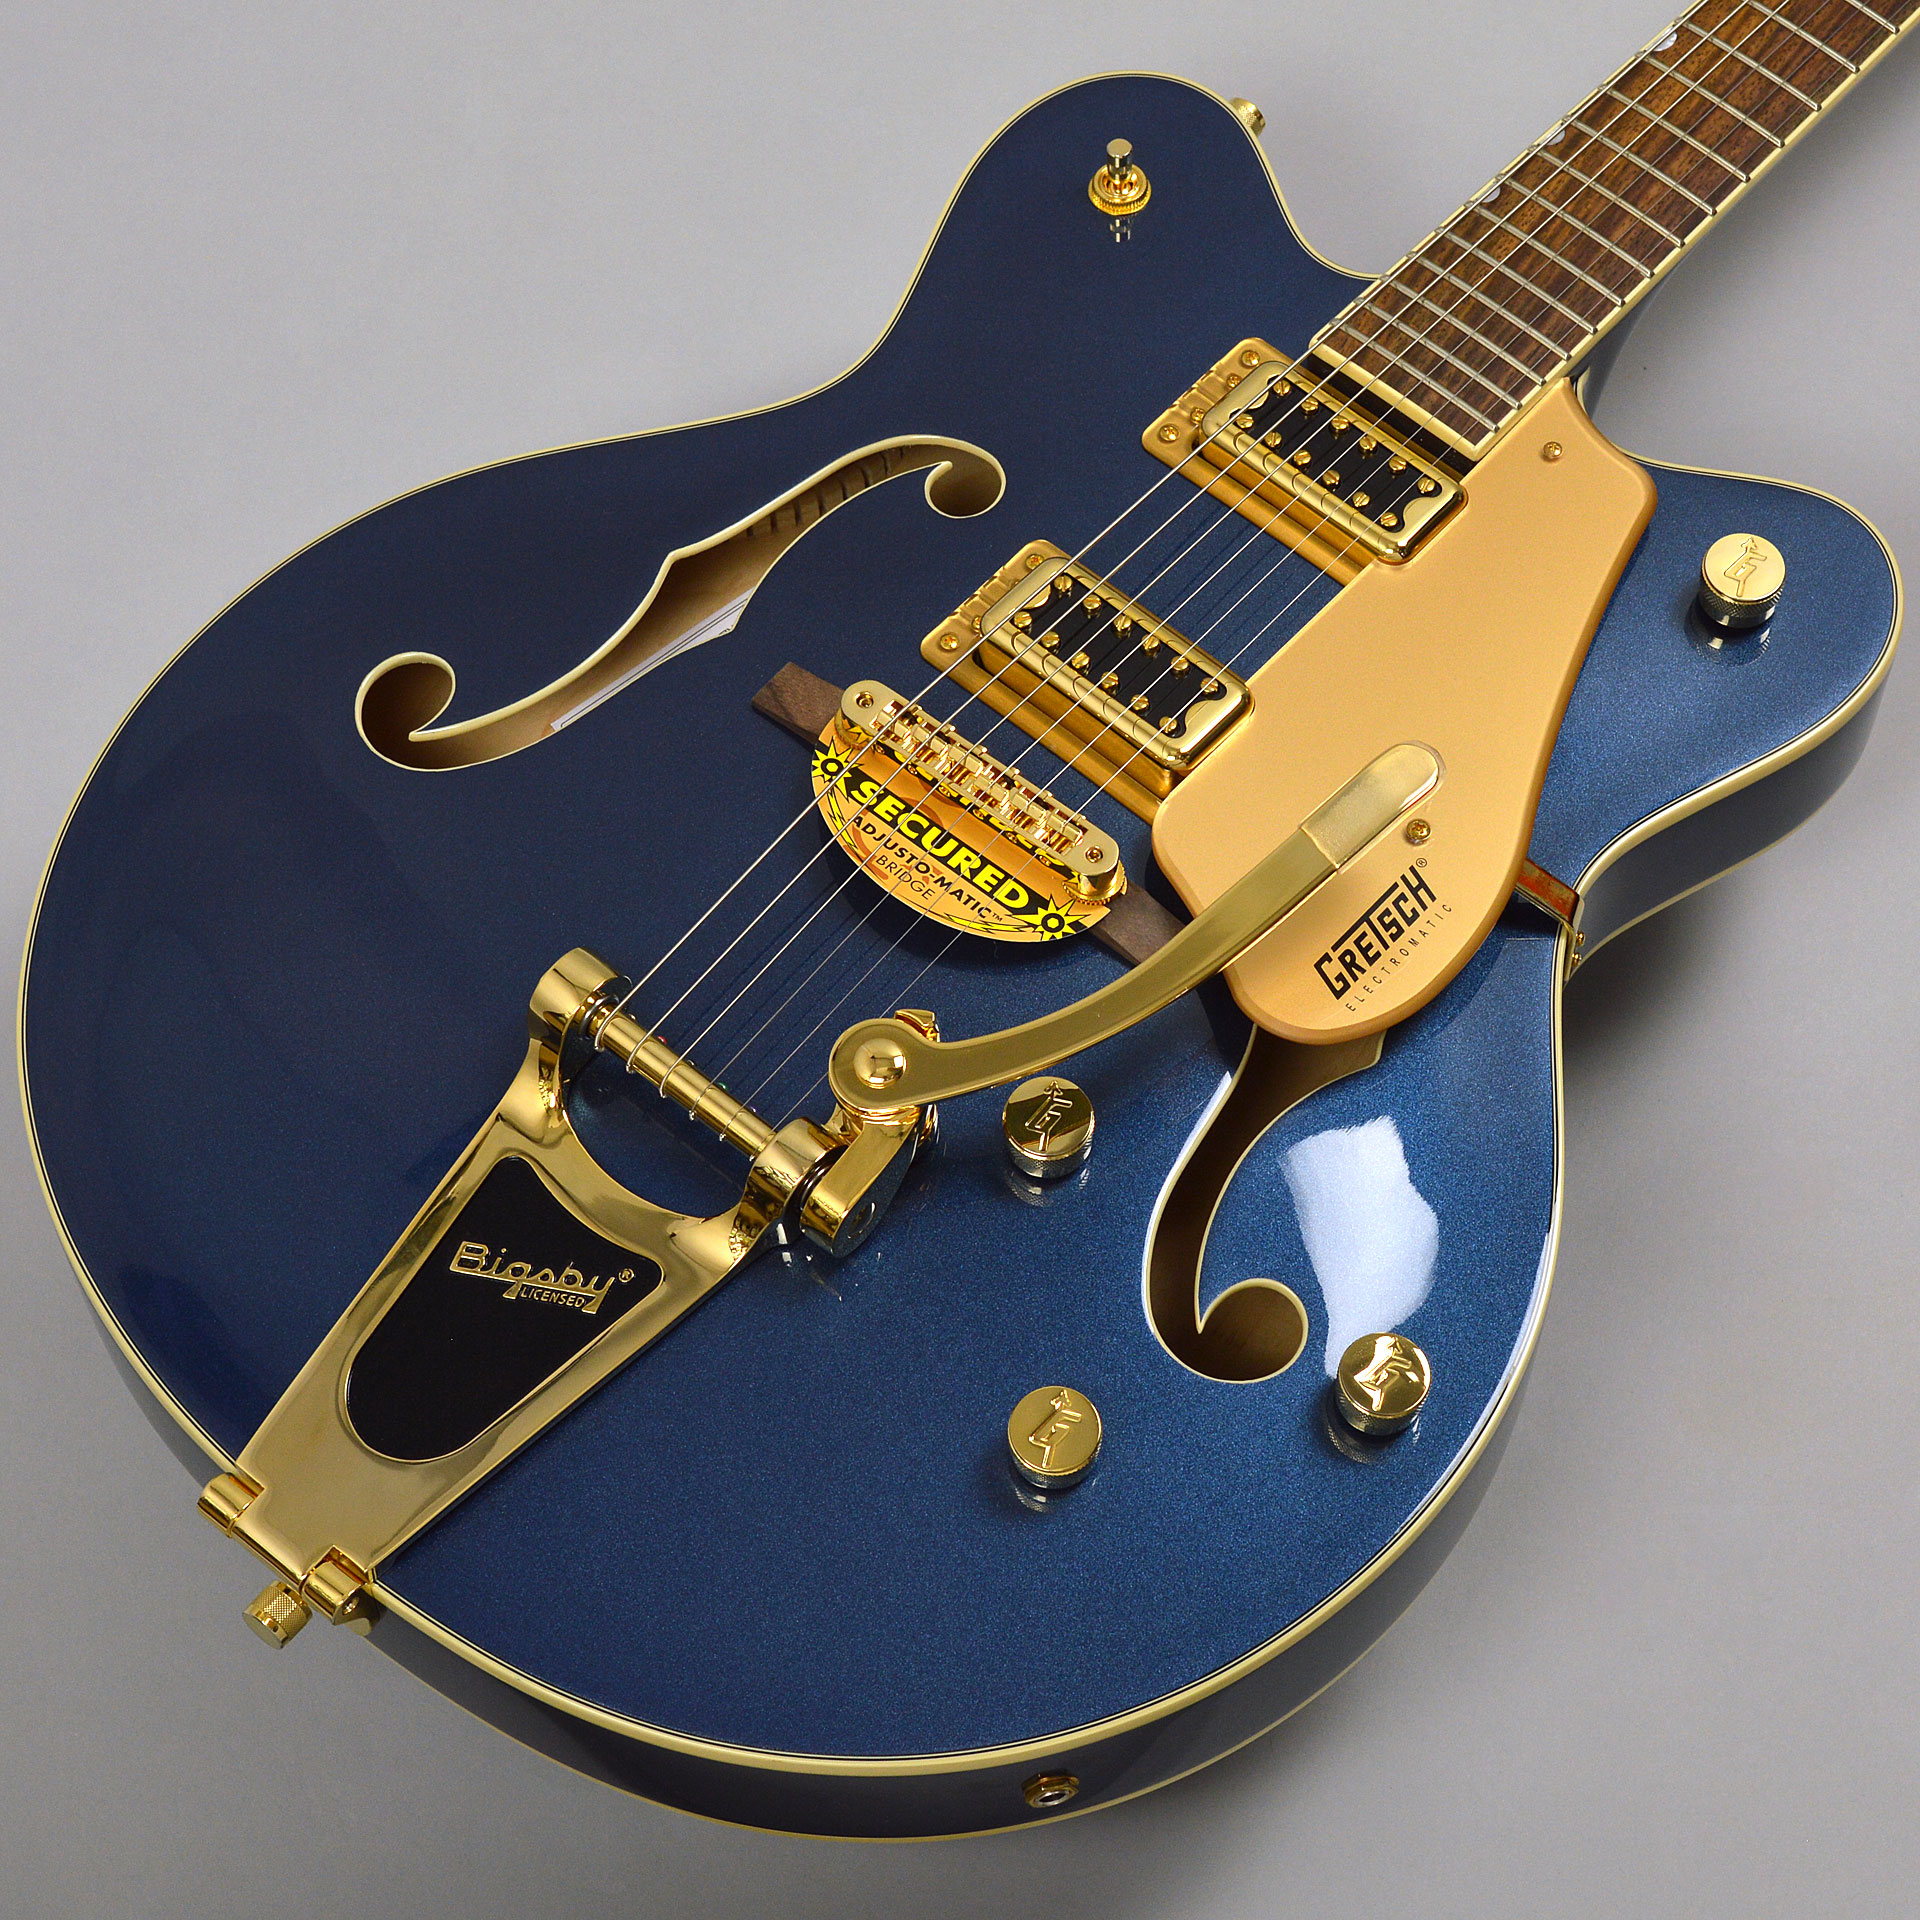 GRETSCH G5422TG Limited Edition Electromatic Hollow Body Double-Cut with Bigsby Cadillac Greenサムネ画像